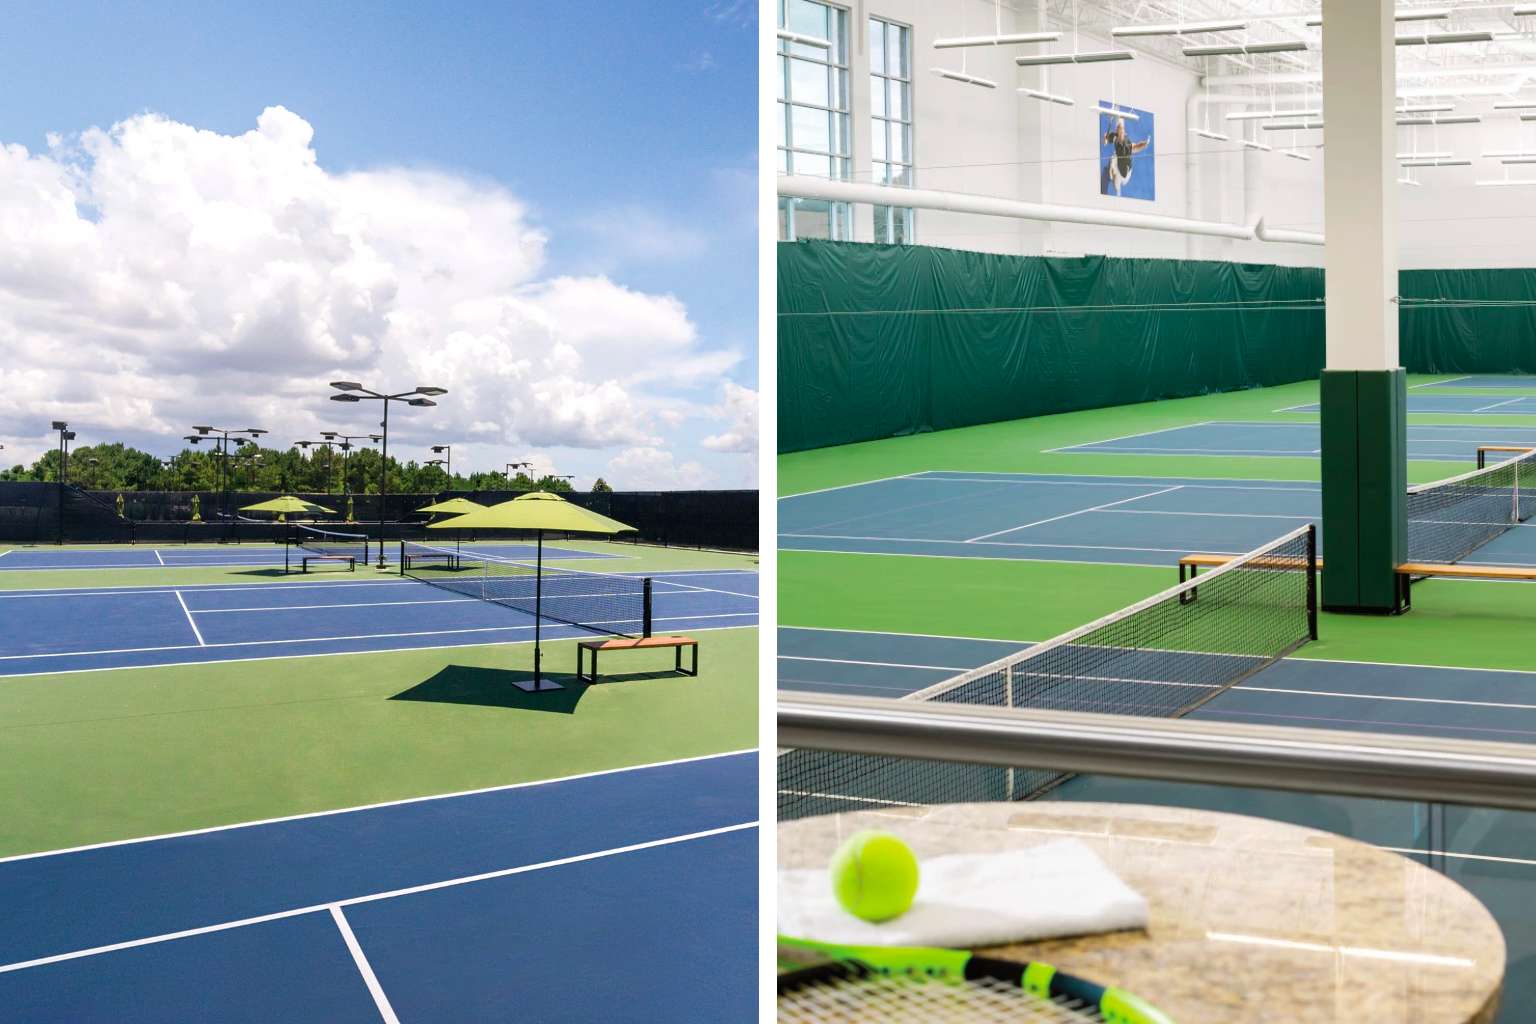 A collage of 2 images. Image 1: Outdoor tennis courts with blue sky background. Image 2: Indoor tennis courts. 